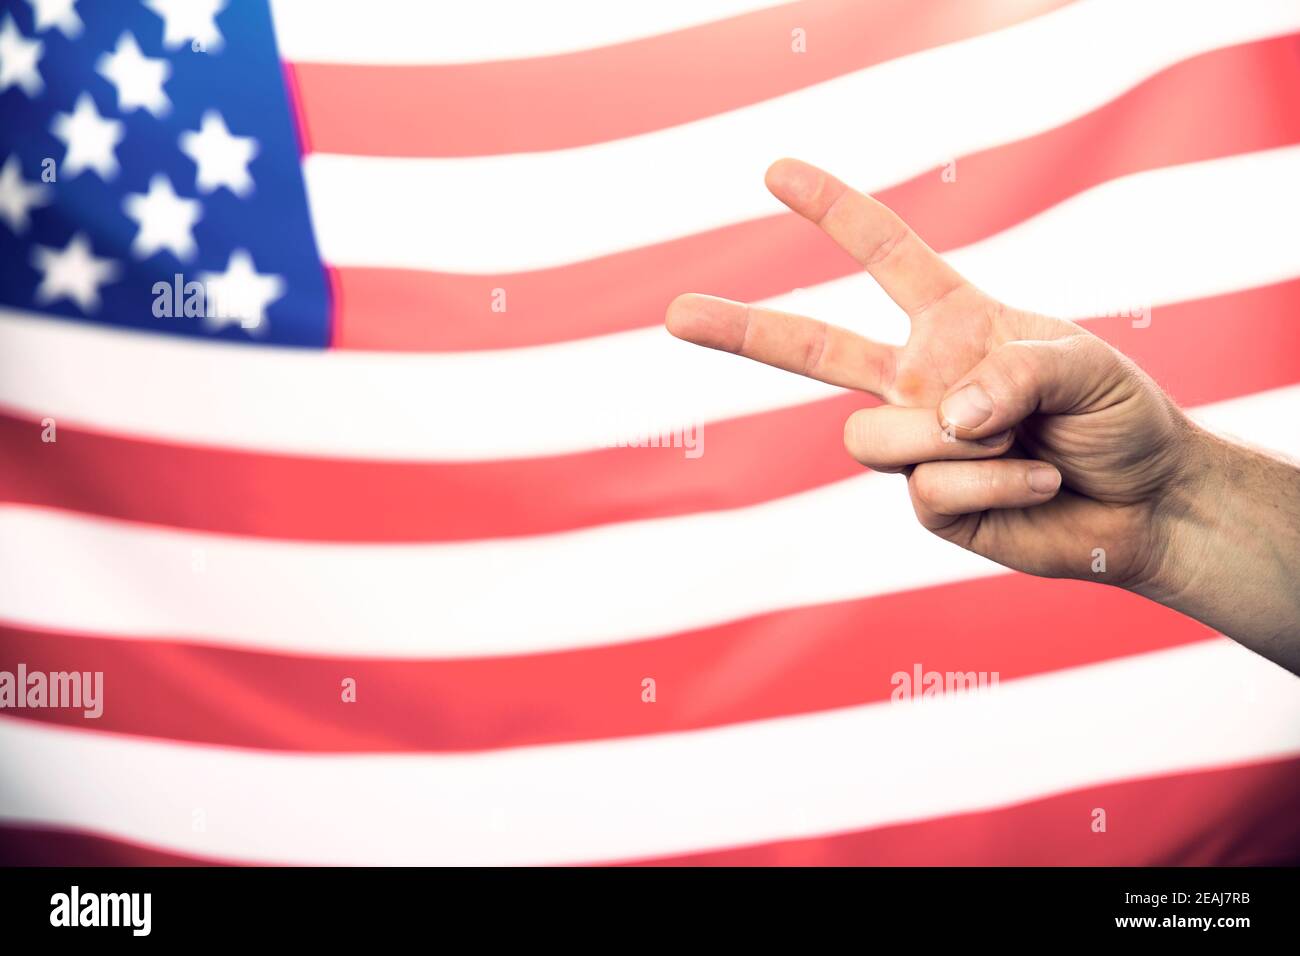 American flag with victory sign Stock Photo